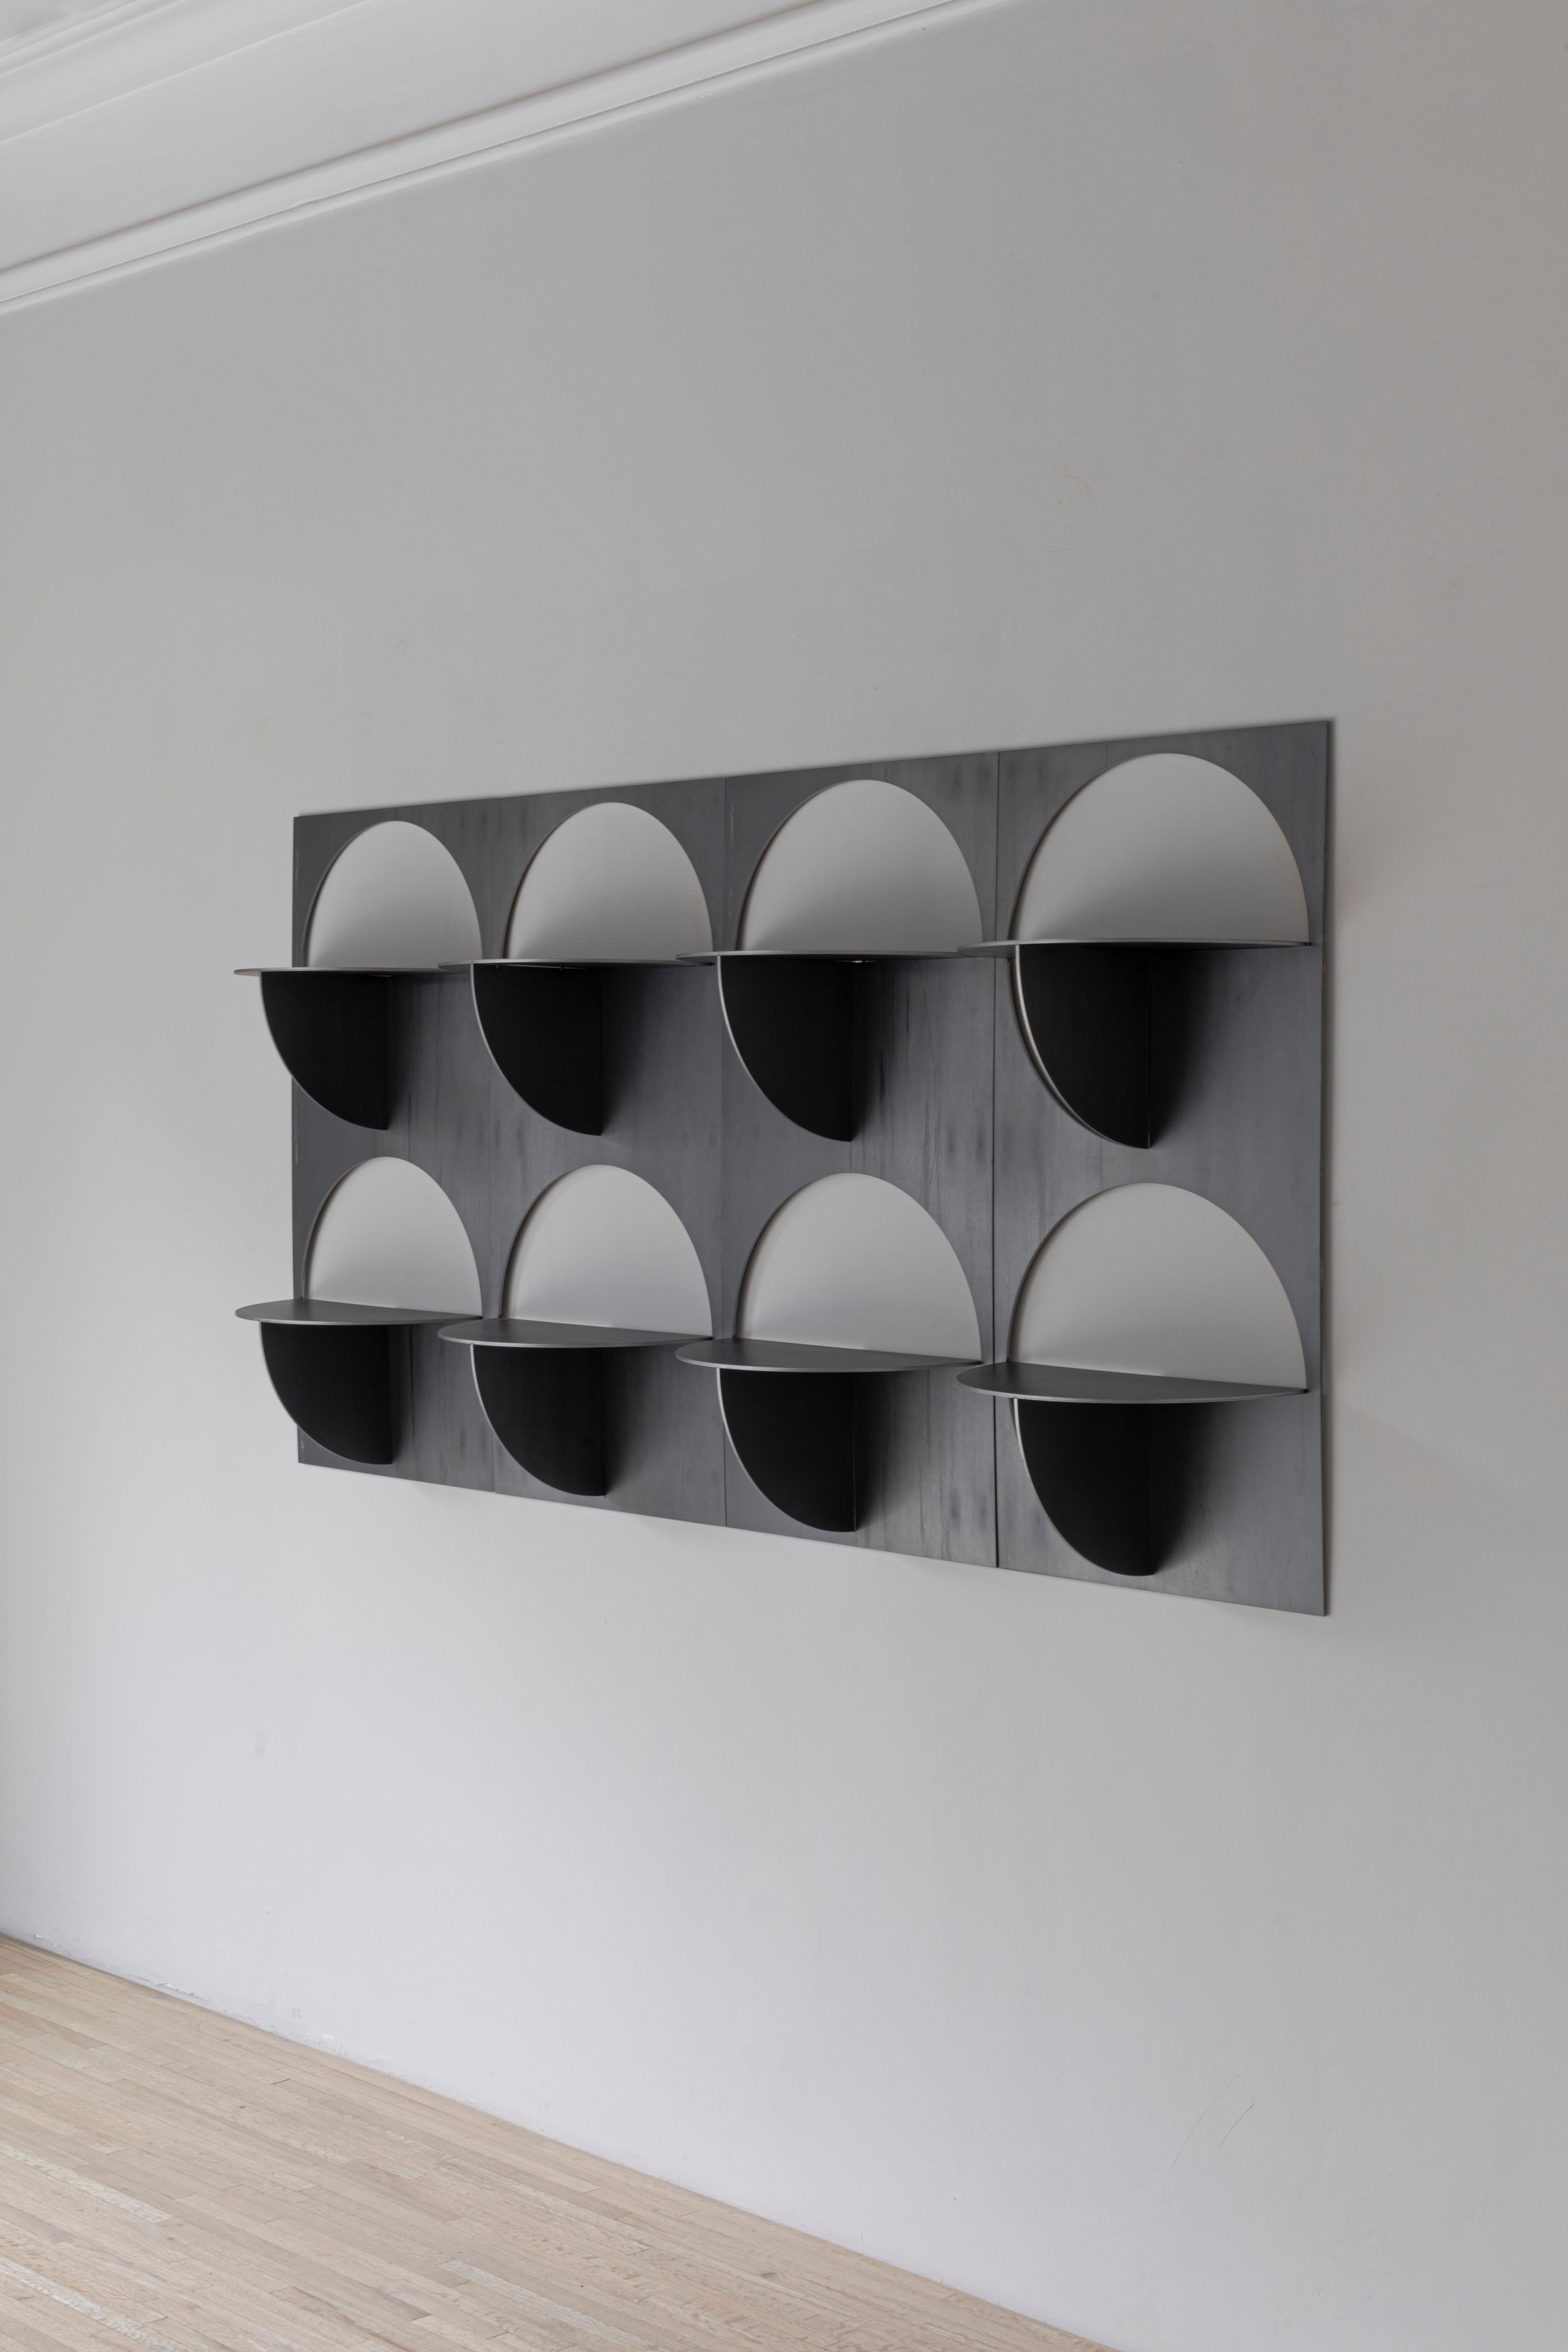 OBJ-04 modular shelving by Manu Bano
Four modules
Dimensions: 200 L X 40 W X 100 H cm
Material: steel

Manu Bano is co-founder of the design studio Ewe and Associate of the renowned furniture, interior design and architecture firm, Esrawe